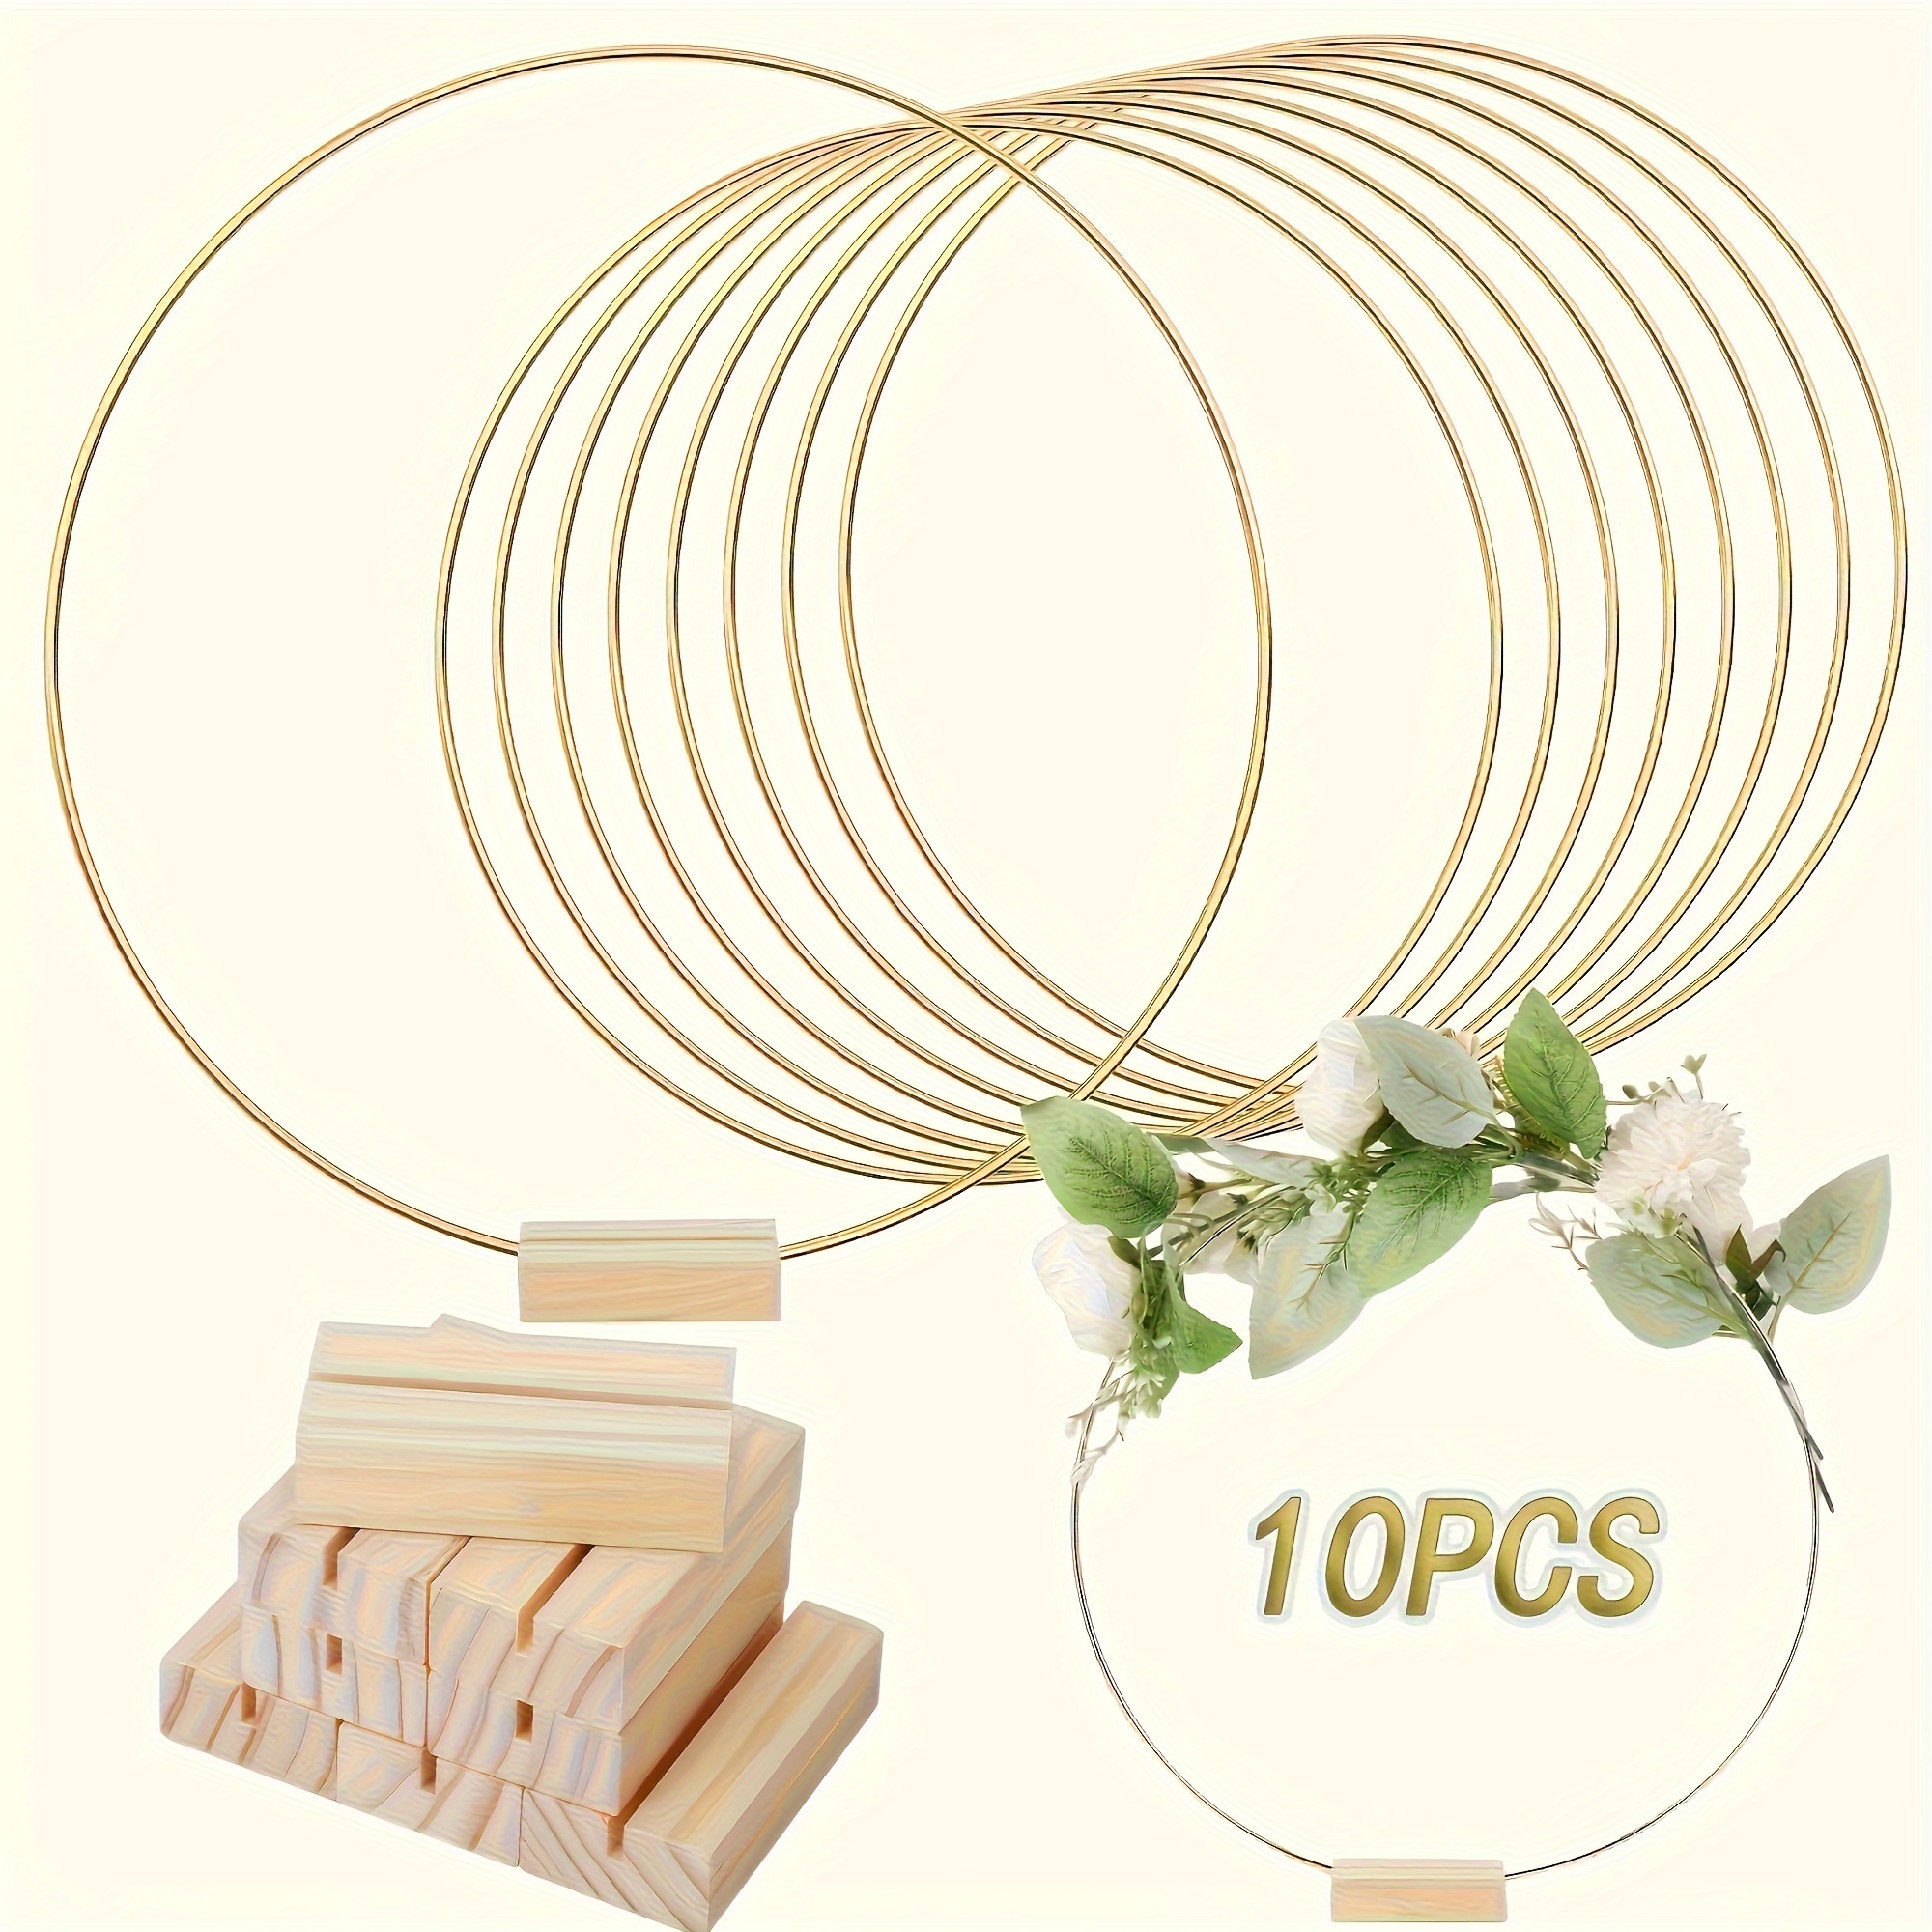 

10 Pcs Elegant Gold Metal Floral Hoop Centerpieces - Durable Wreath Rings With - Ideal For Wedding Receptions, Anniversaries, And Festive Celebrations